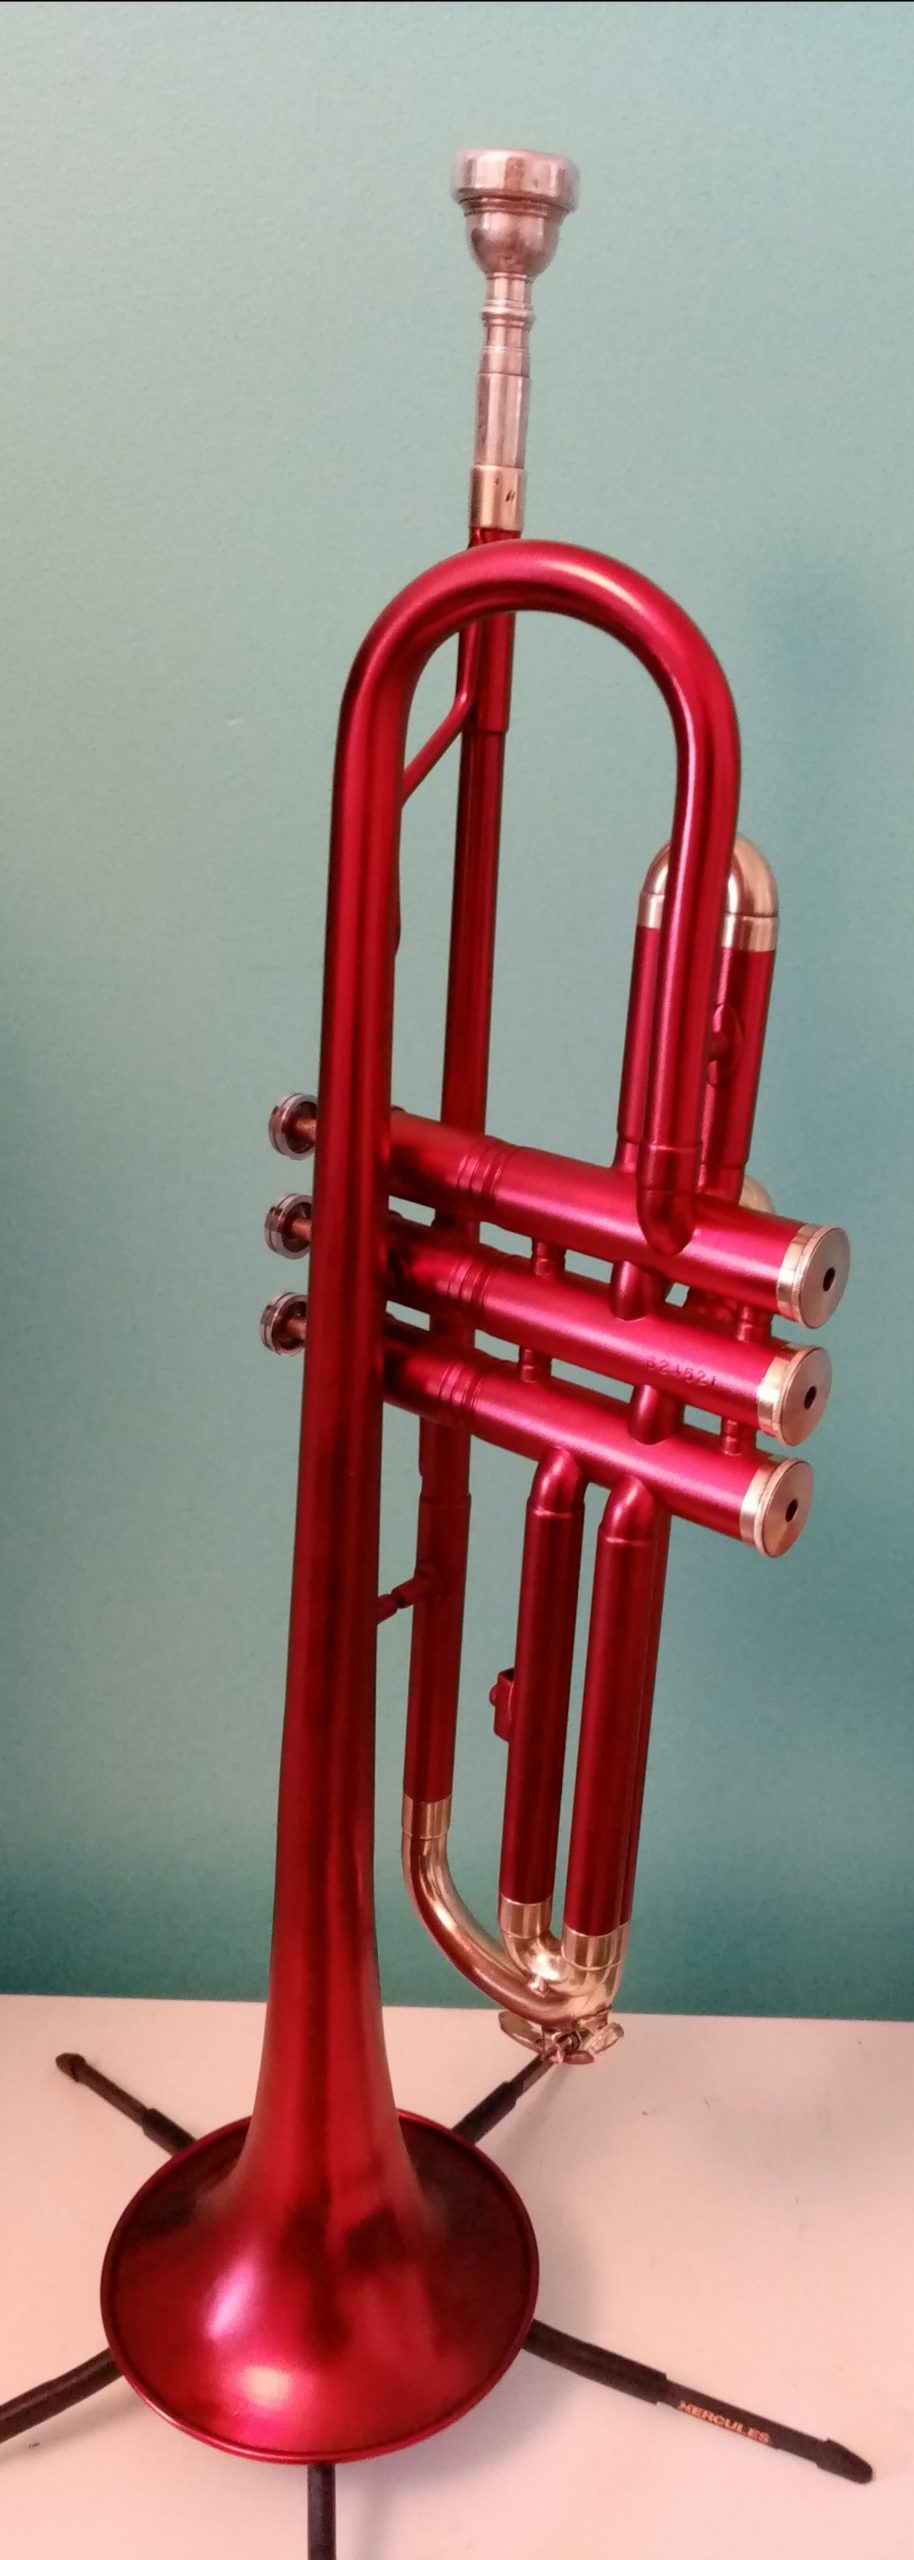 finished trumpet red lacquer